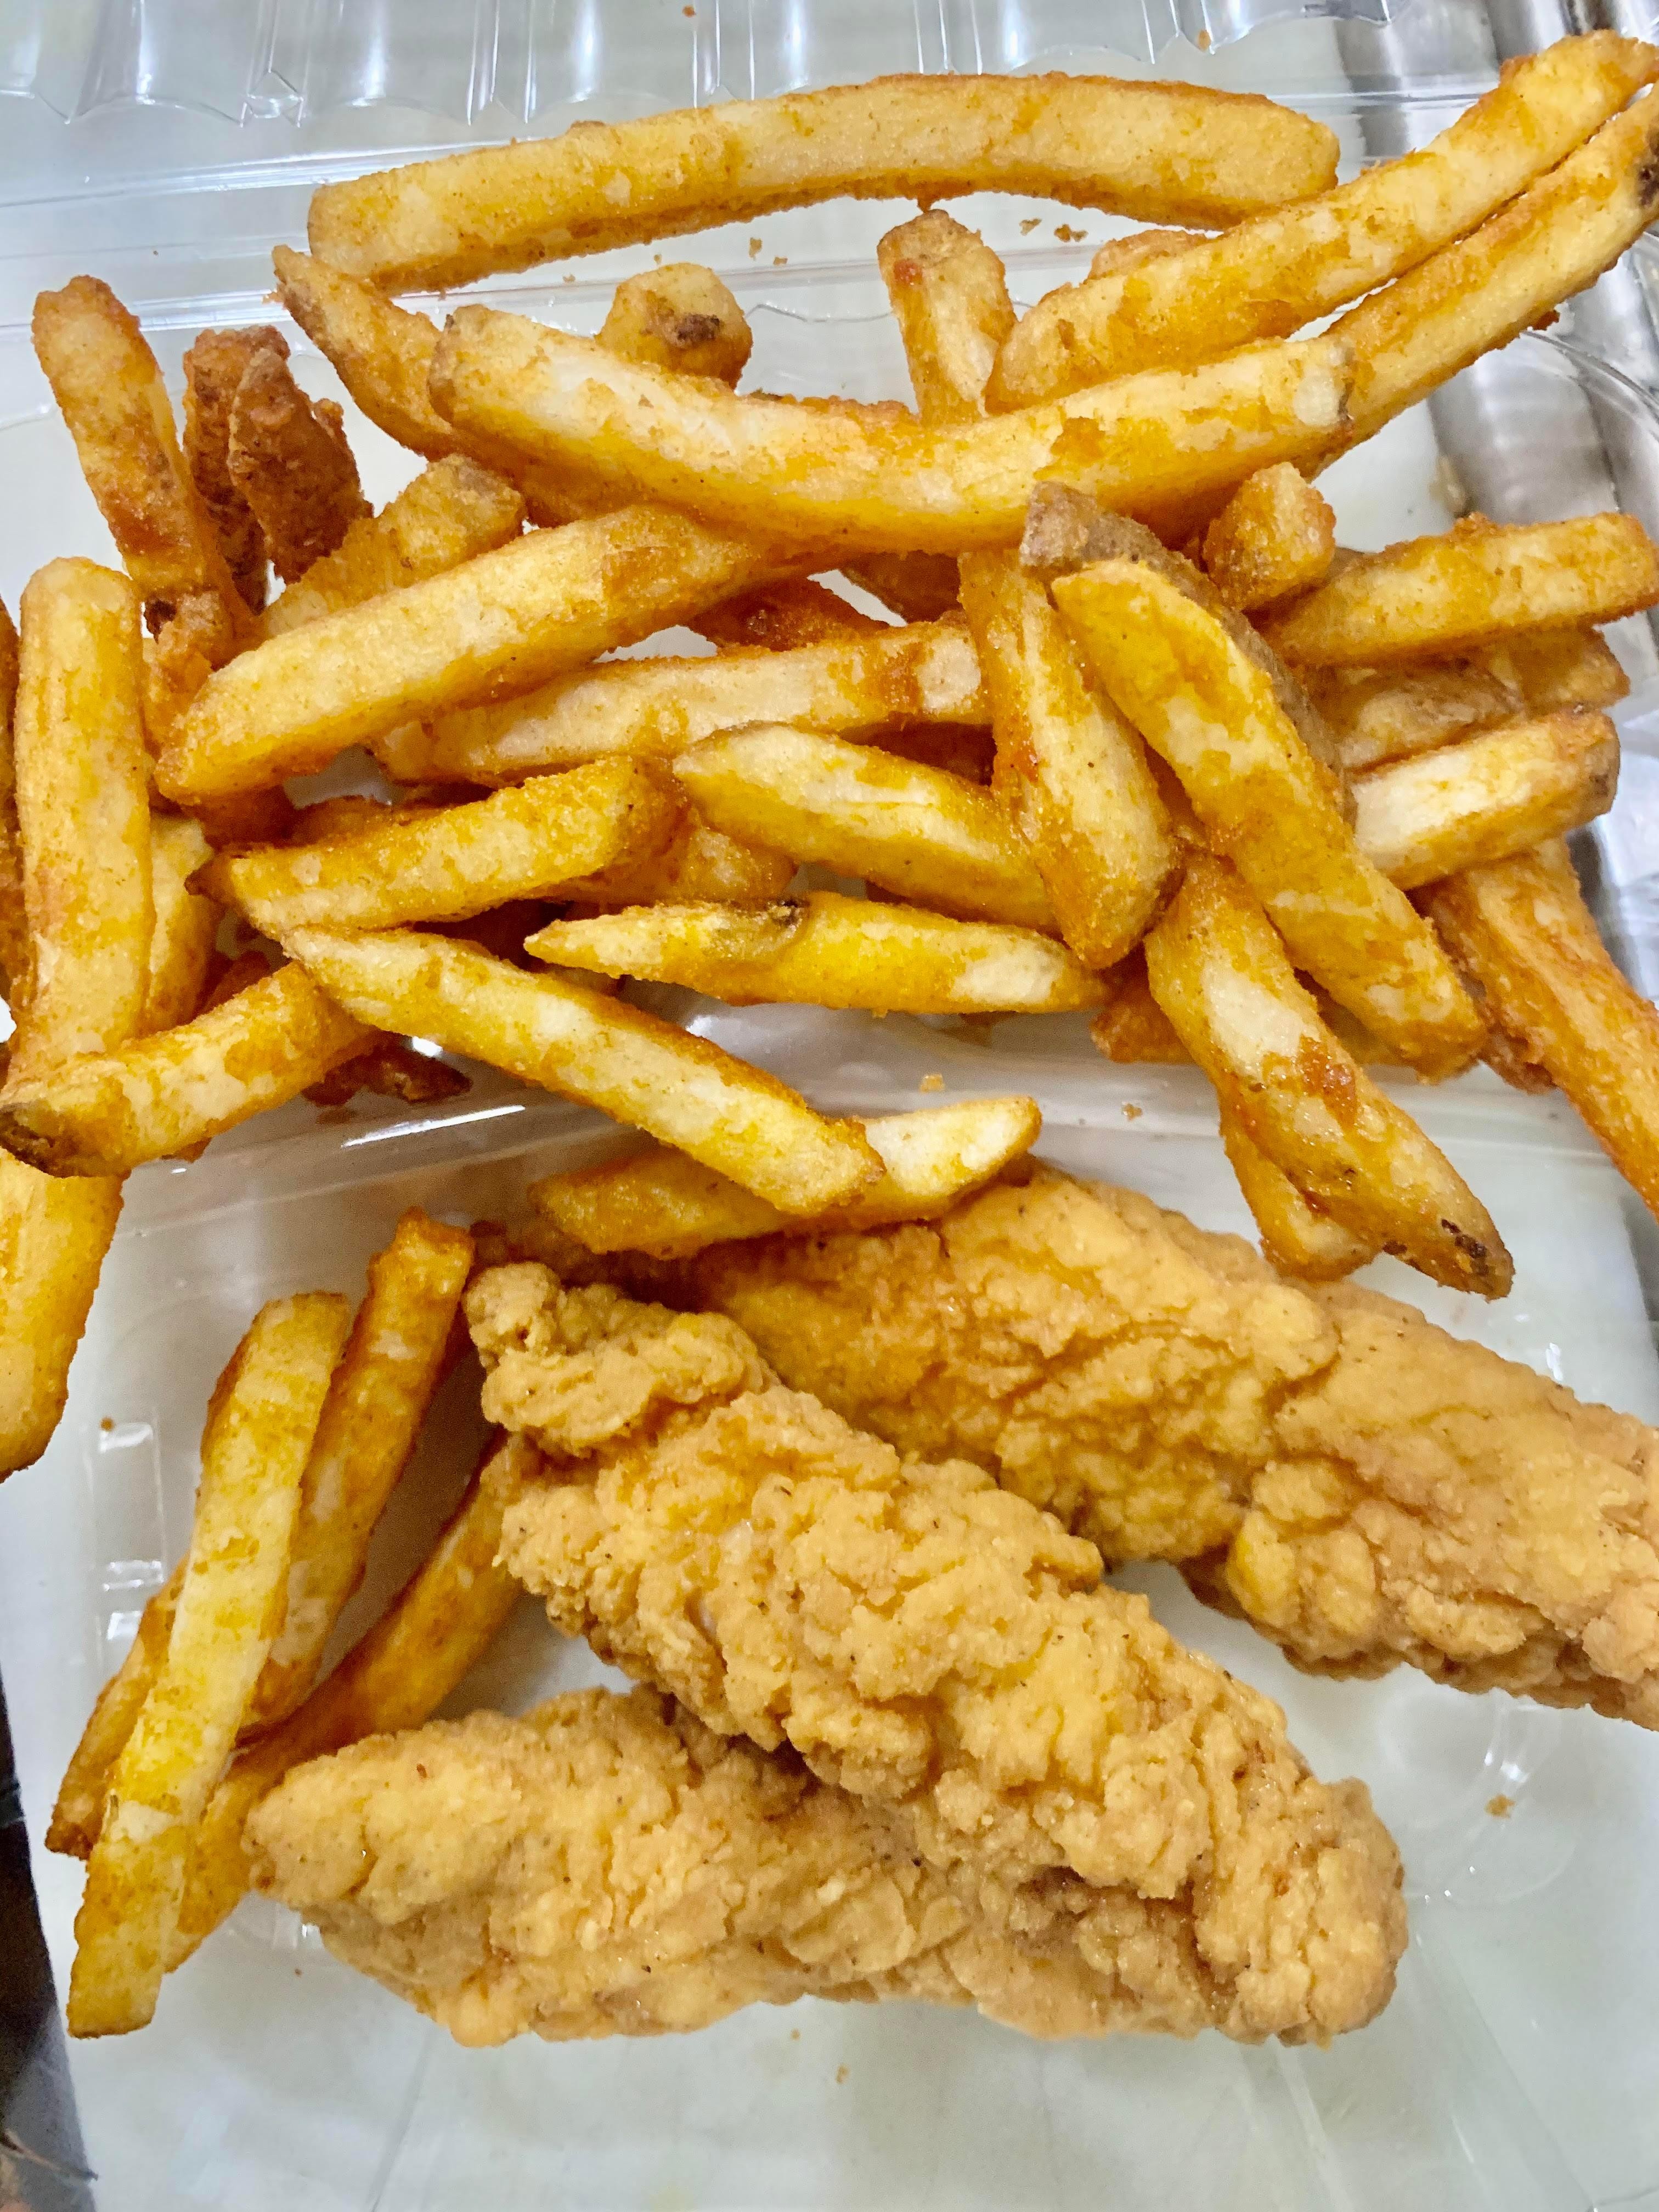 Chicken Tenders with soda